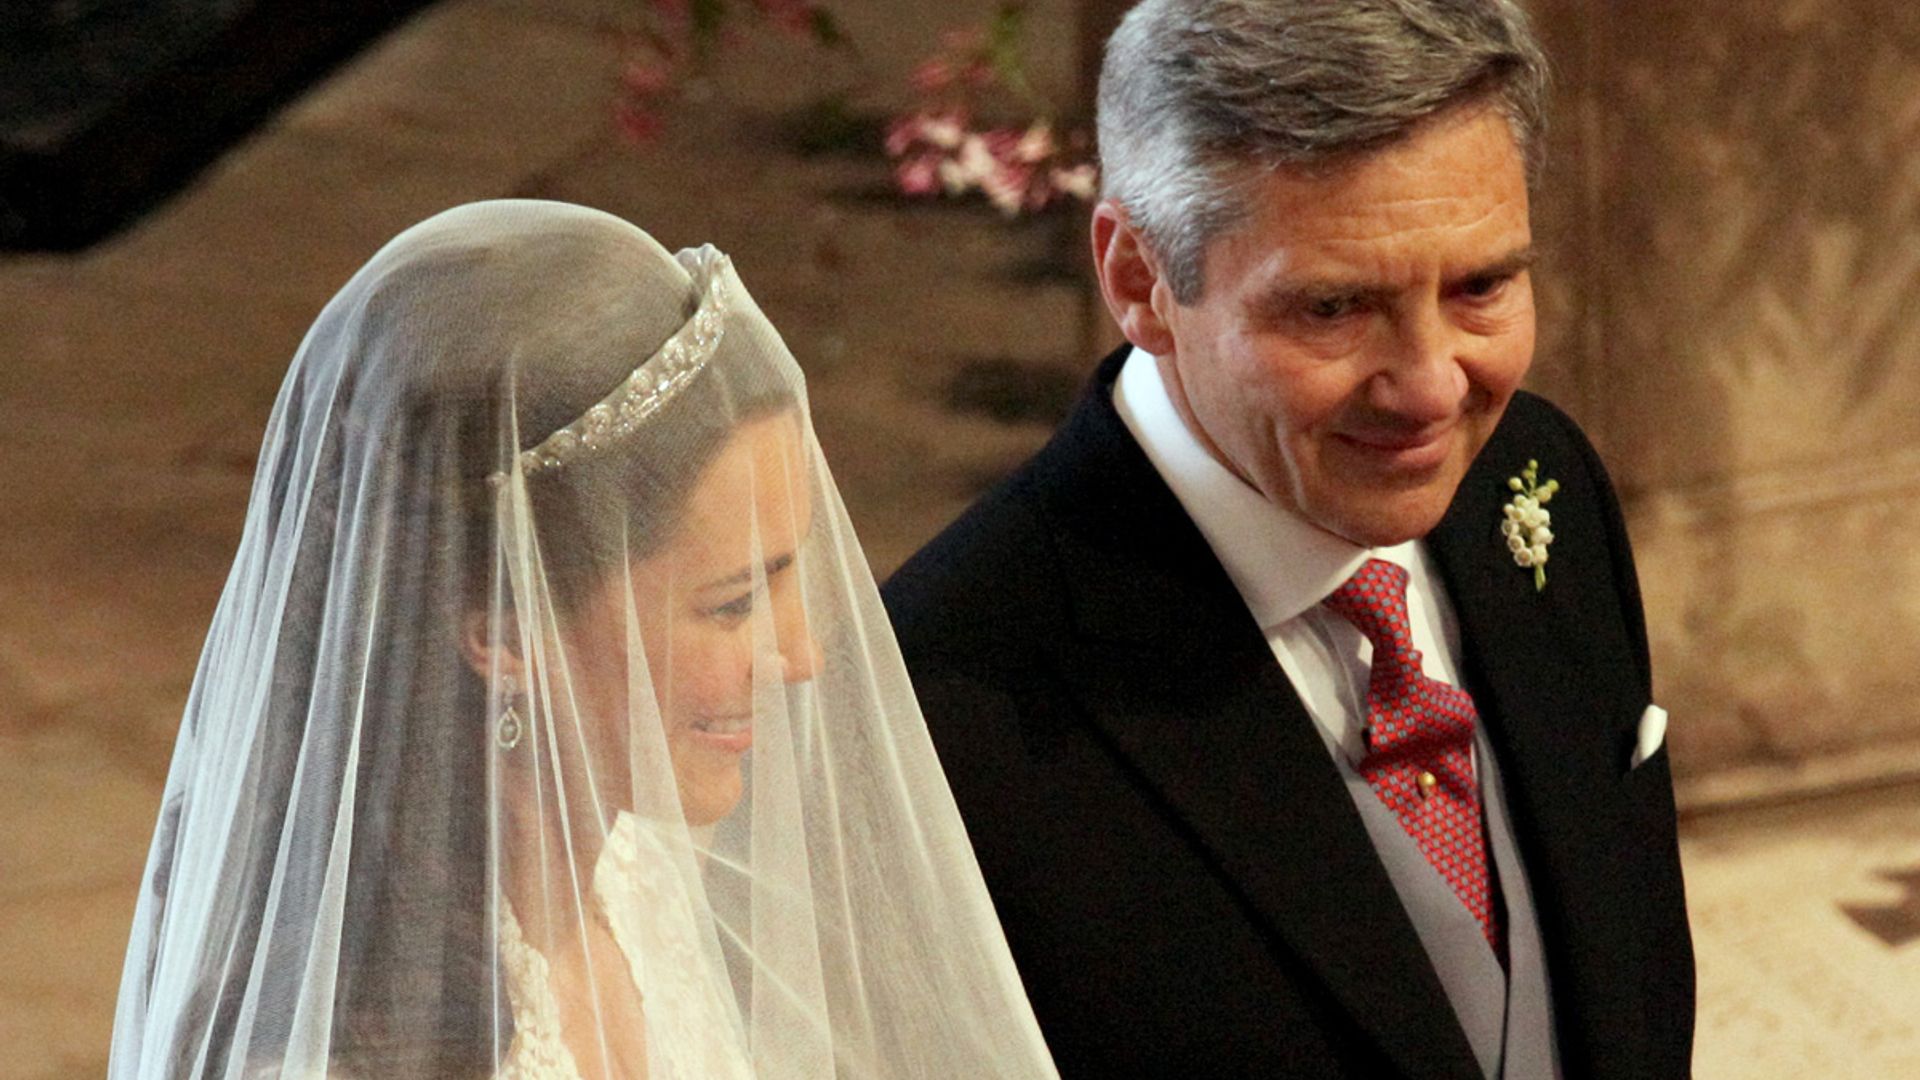 Kate Middleton’s dad Michael looks SO proud in sweet unearthed wedding photos